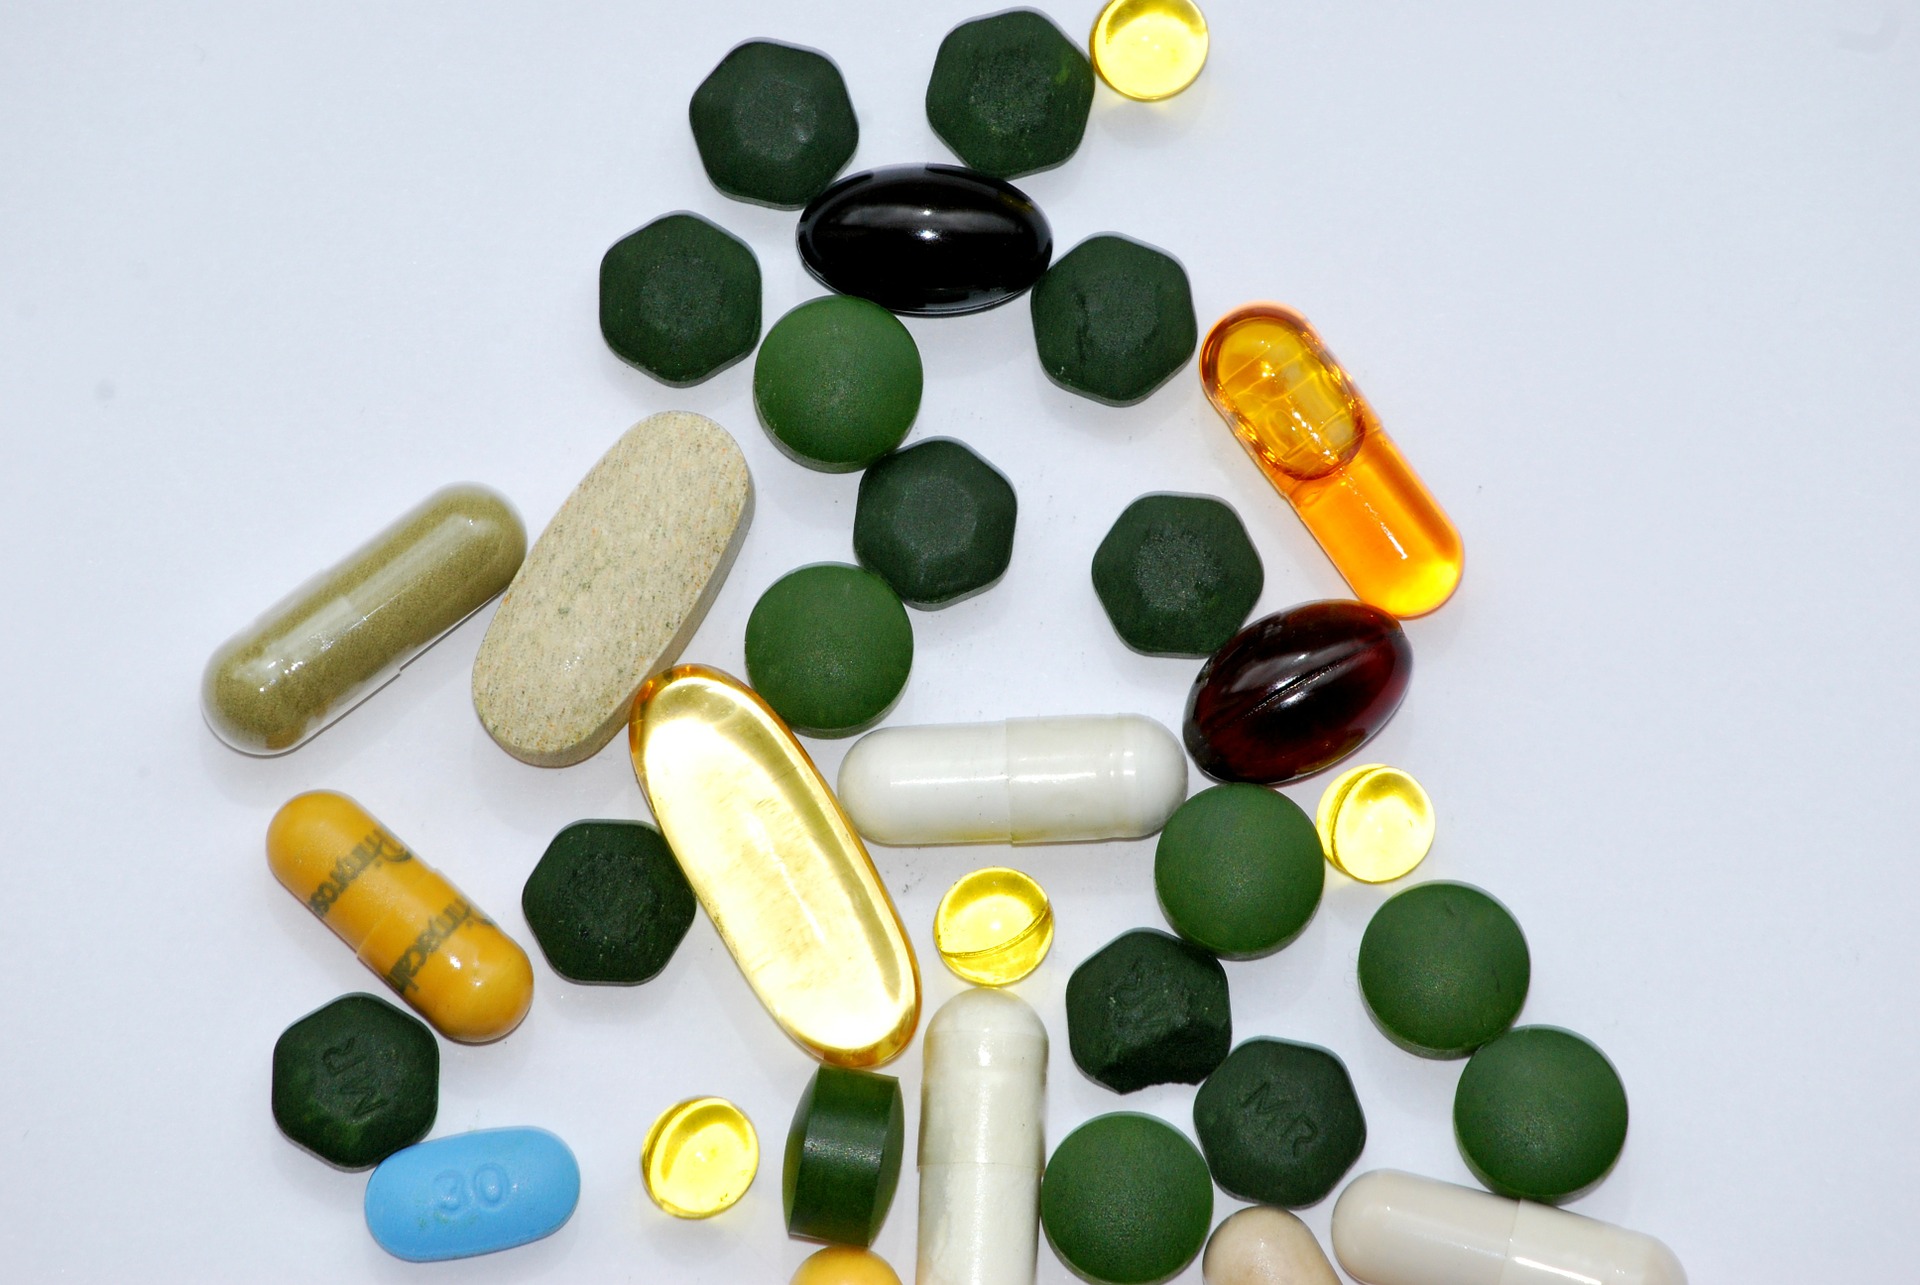 Are Vitamins And ‘Natural’ Supplements Good For You?